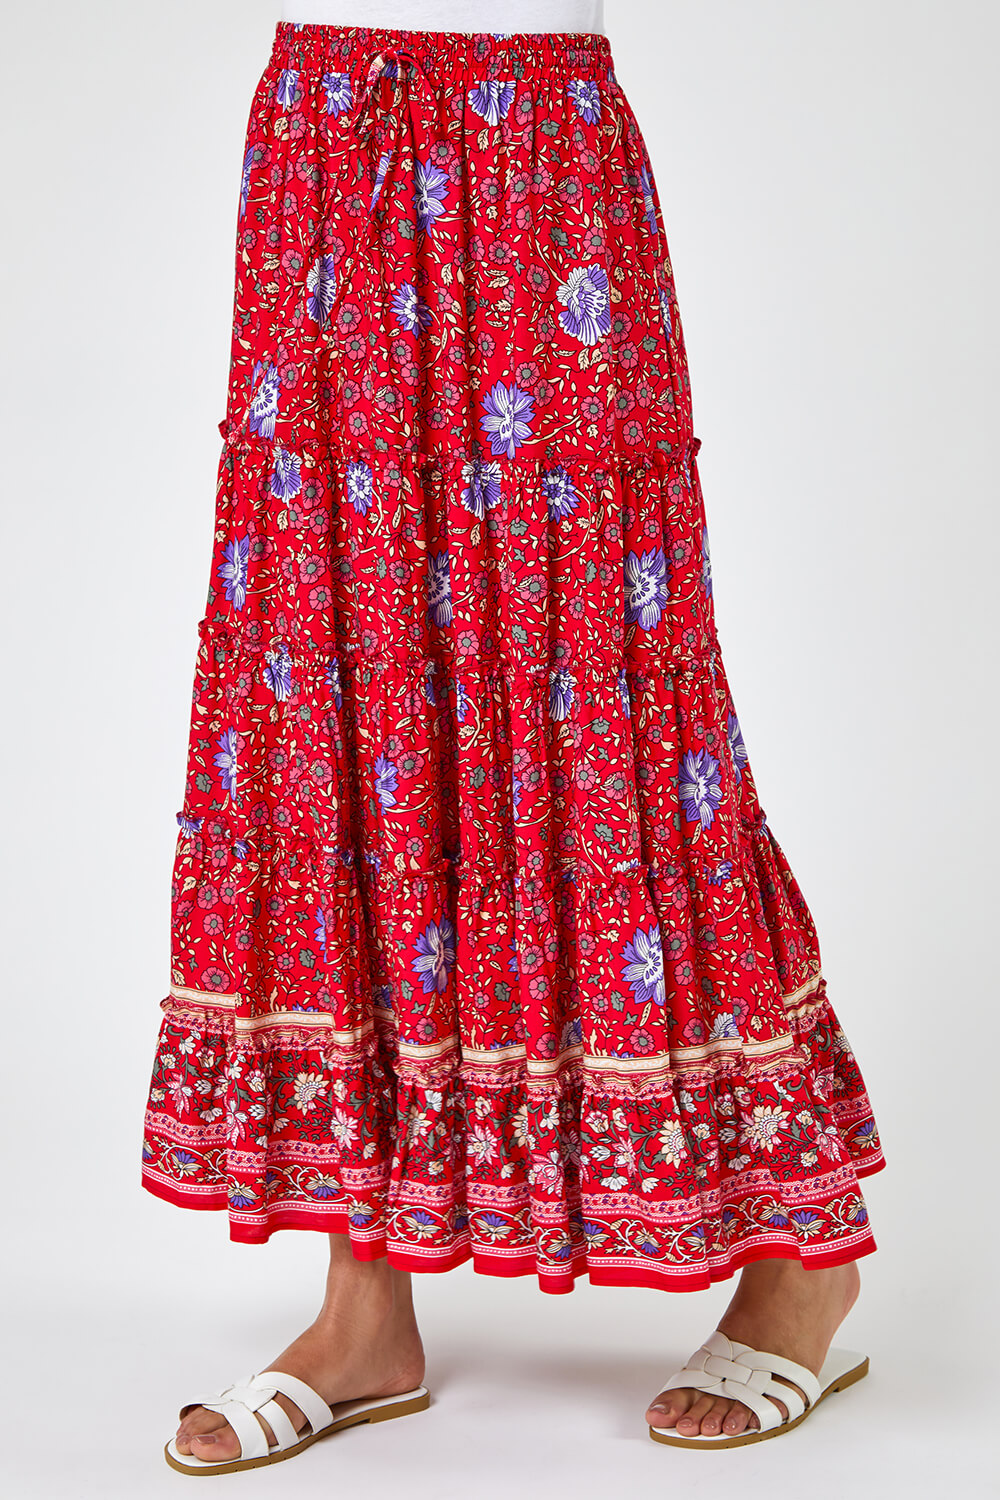 Boho Floral Print Tiered Maxi Skirt in Red - Roman Originals UK